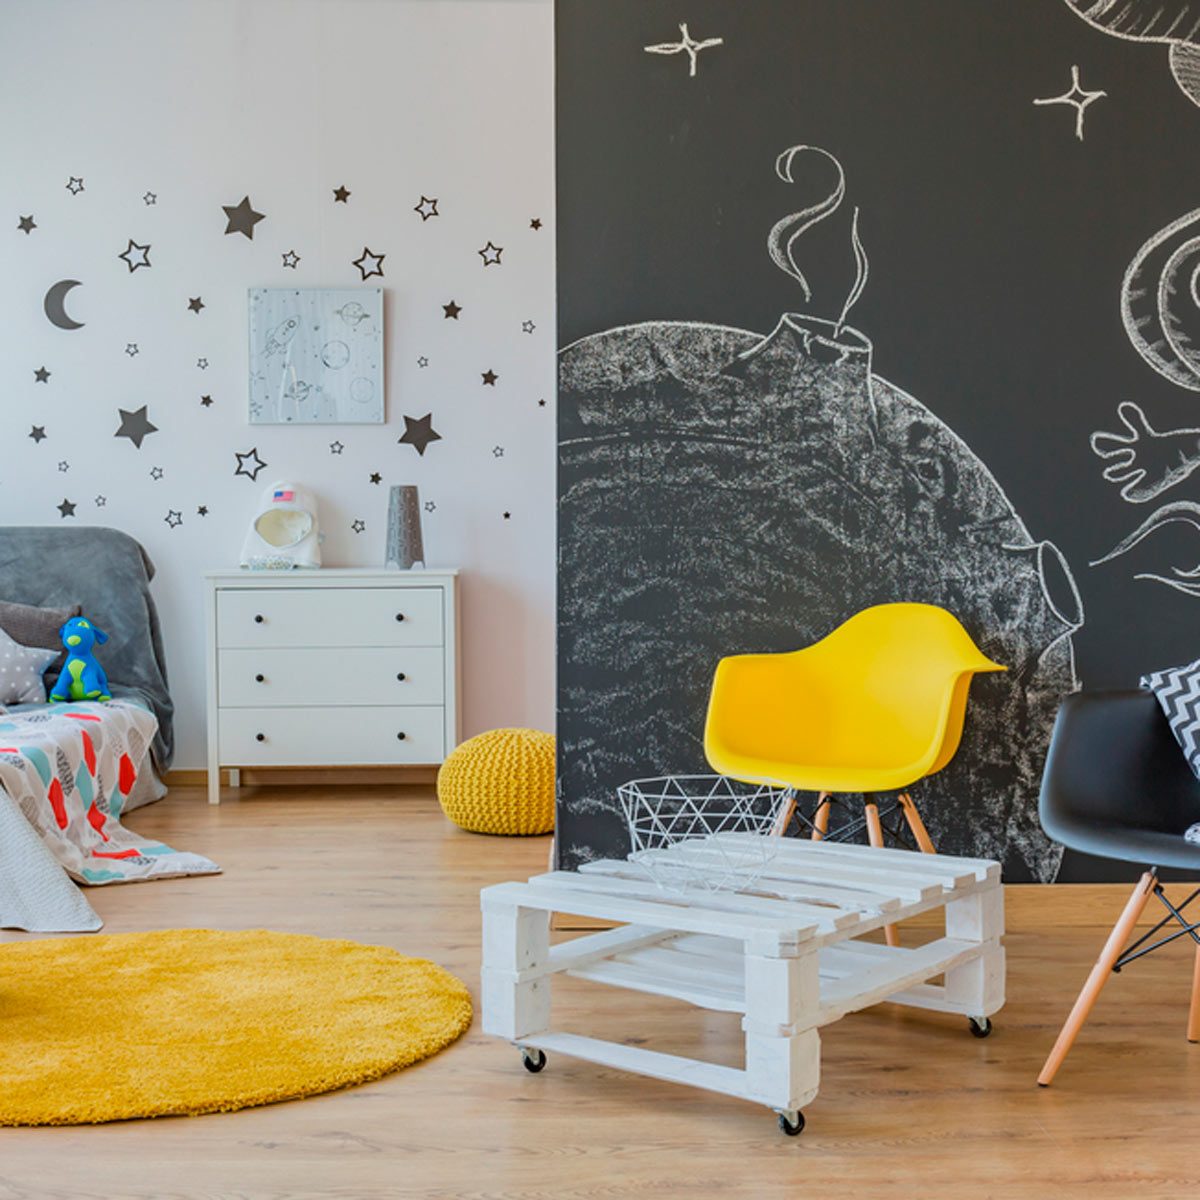 Kids Room Ideas That'll Give You Instant Inspiration!